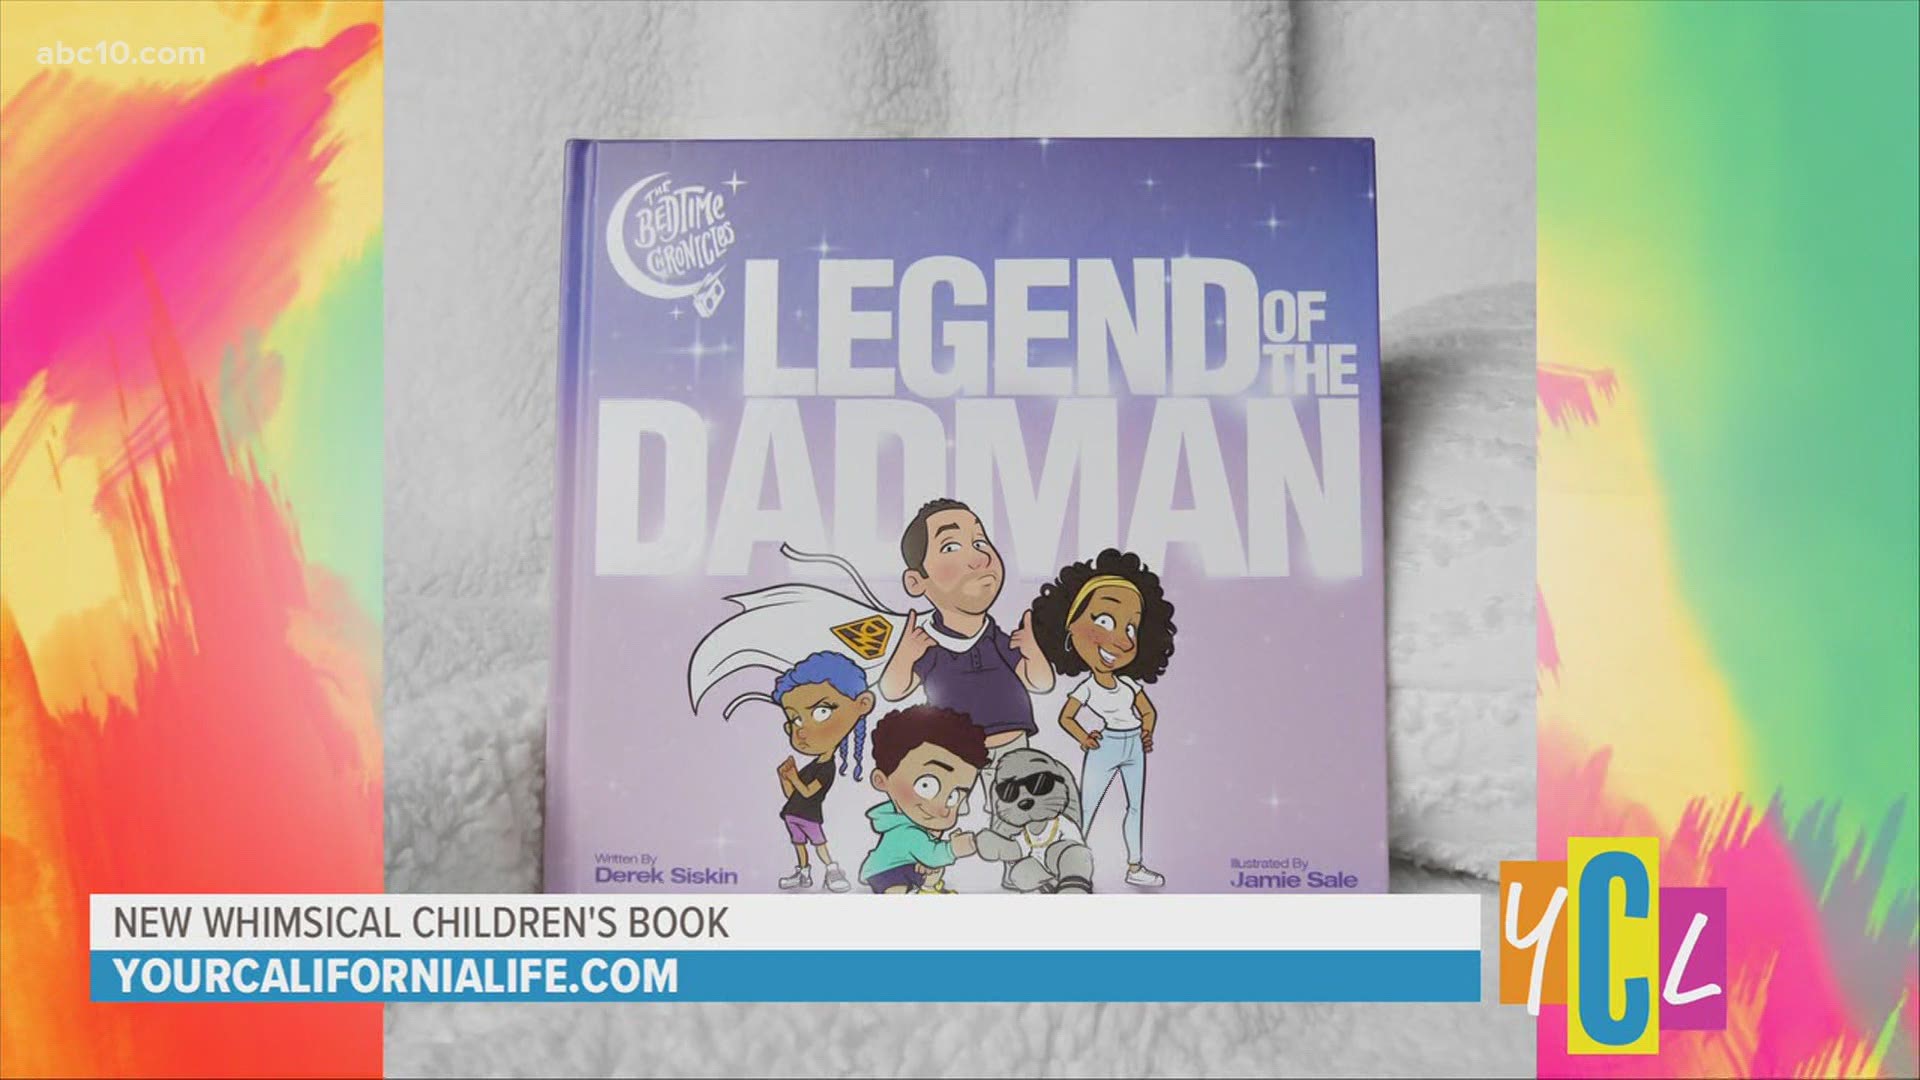 The Bedtime Chronicles is a new children’s book series bringing a unique and innovative spin to the traditional rhyme book genre, following the 'Legend of Dadman.'